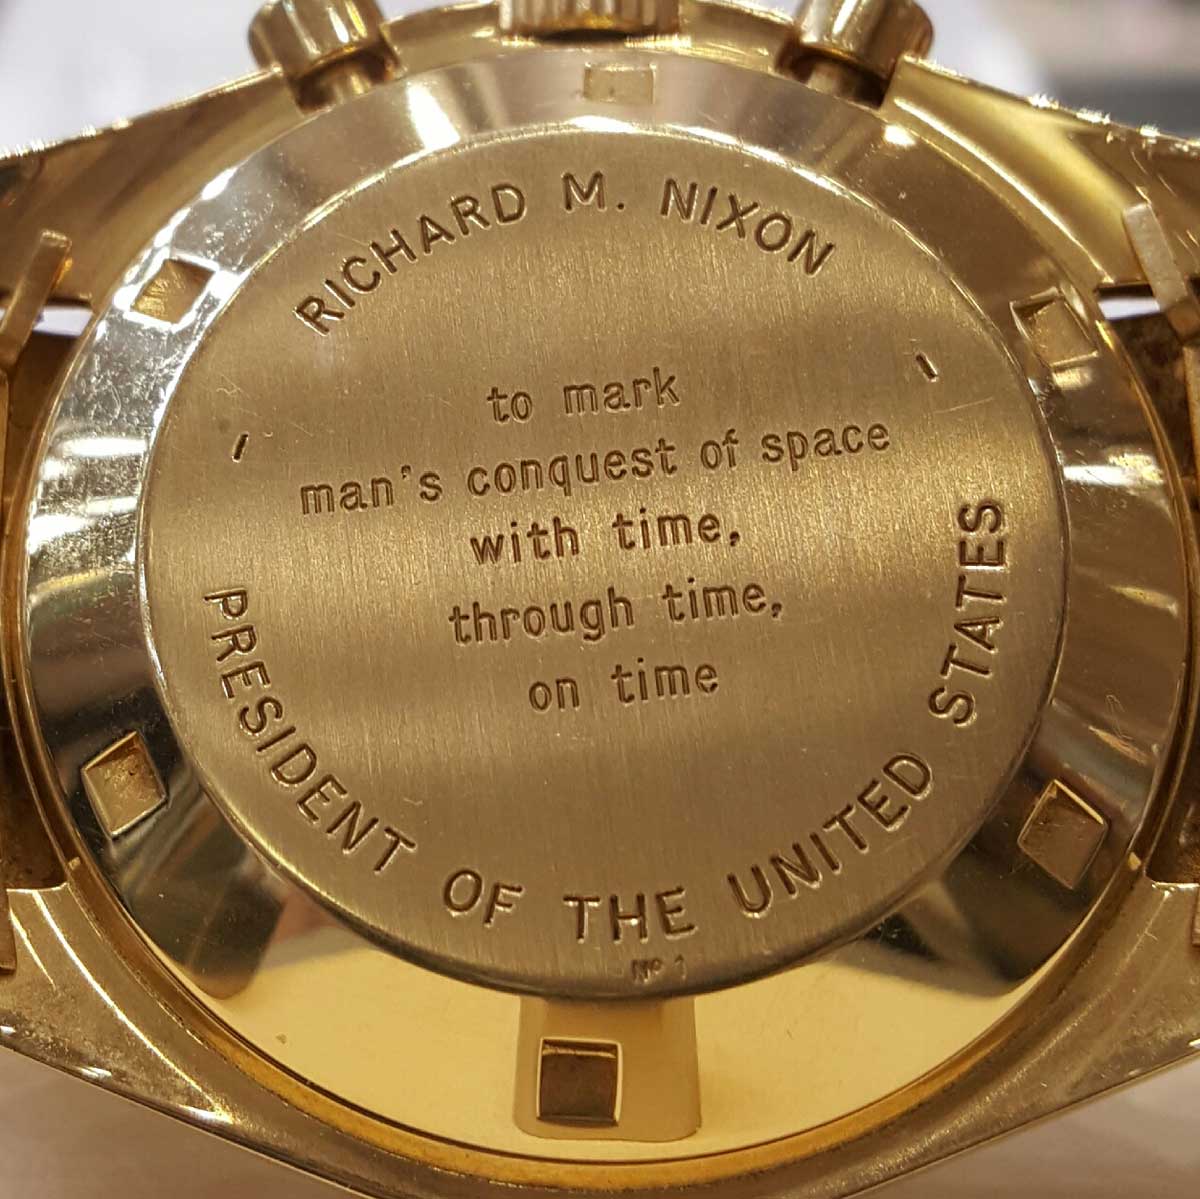 Number 1 of 1014, the Omega 145.022 that was intended for President Richard Nixon